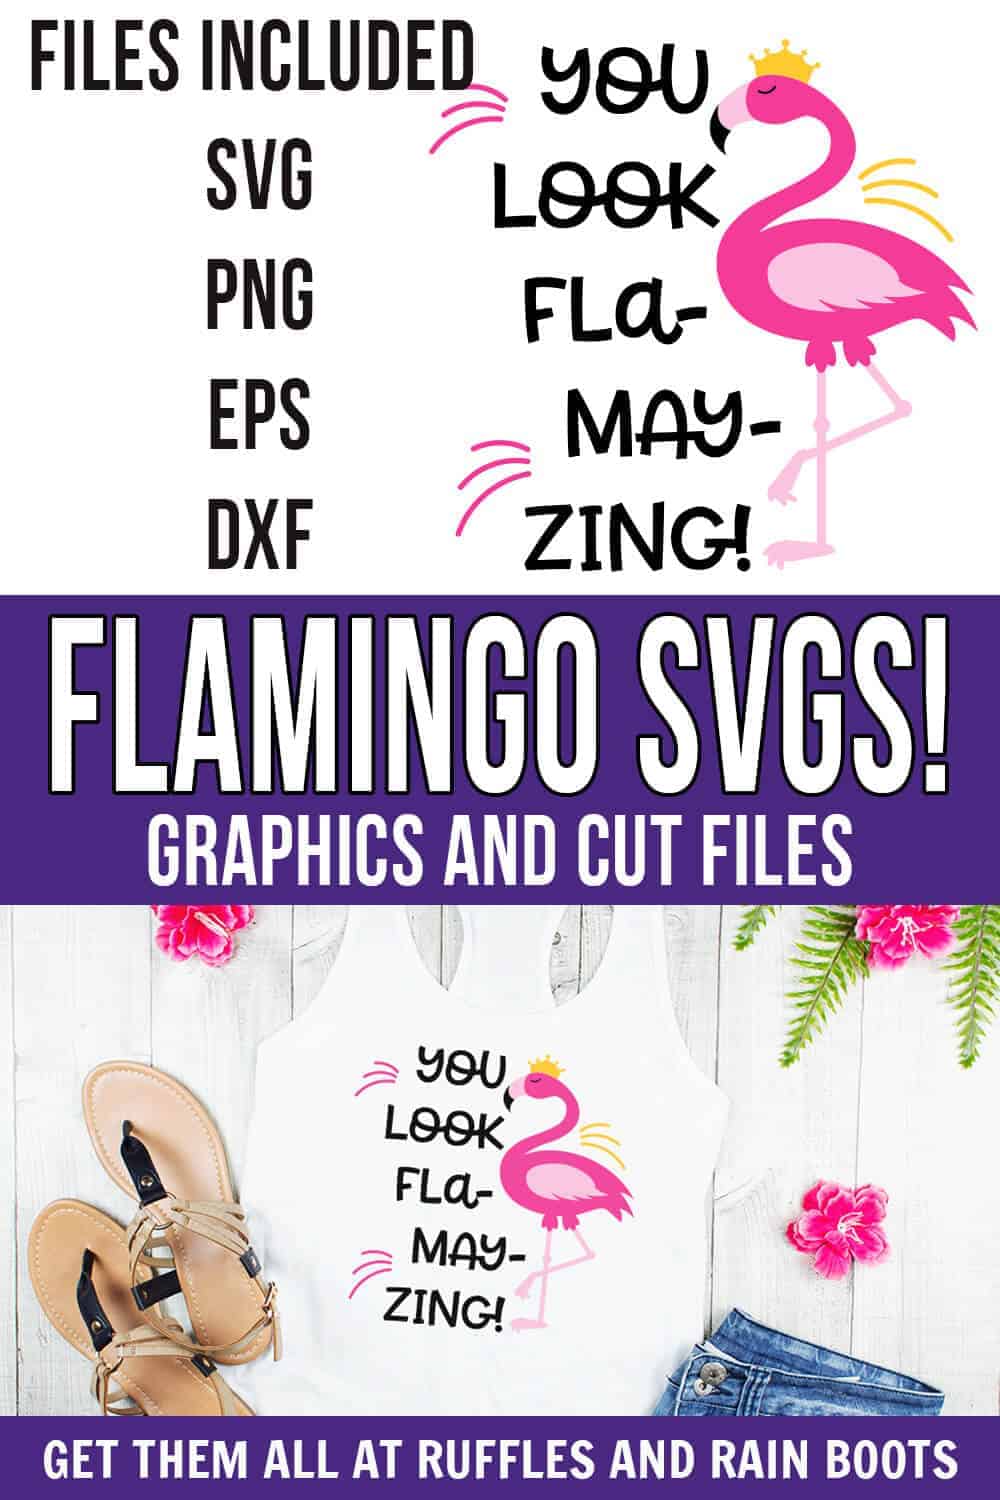 photo collage of cute flamingo svg you look flamazing cut file clipart with text which reads flamingo svgs! graphics and cut files